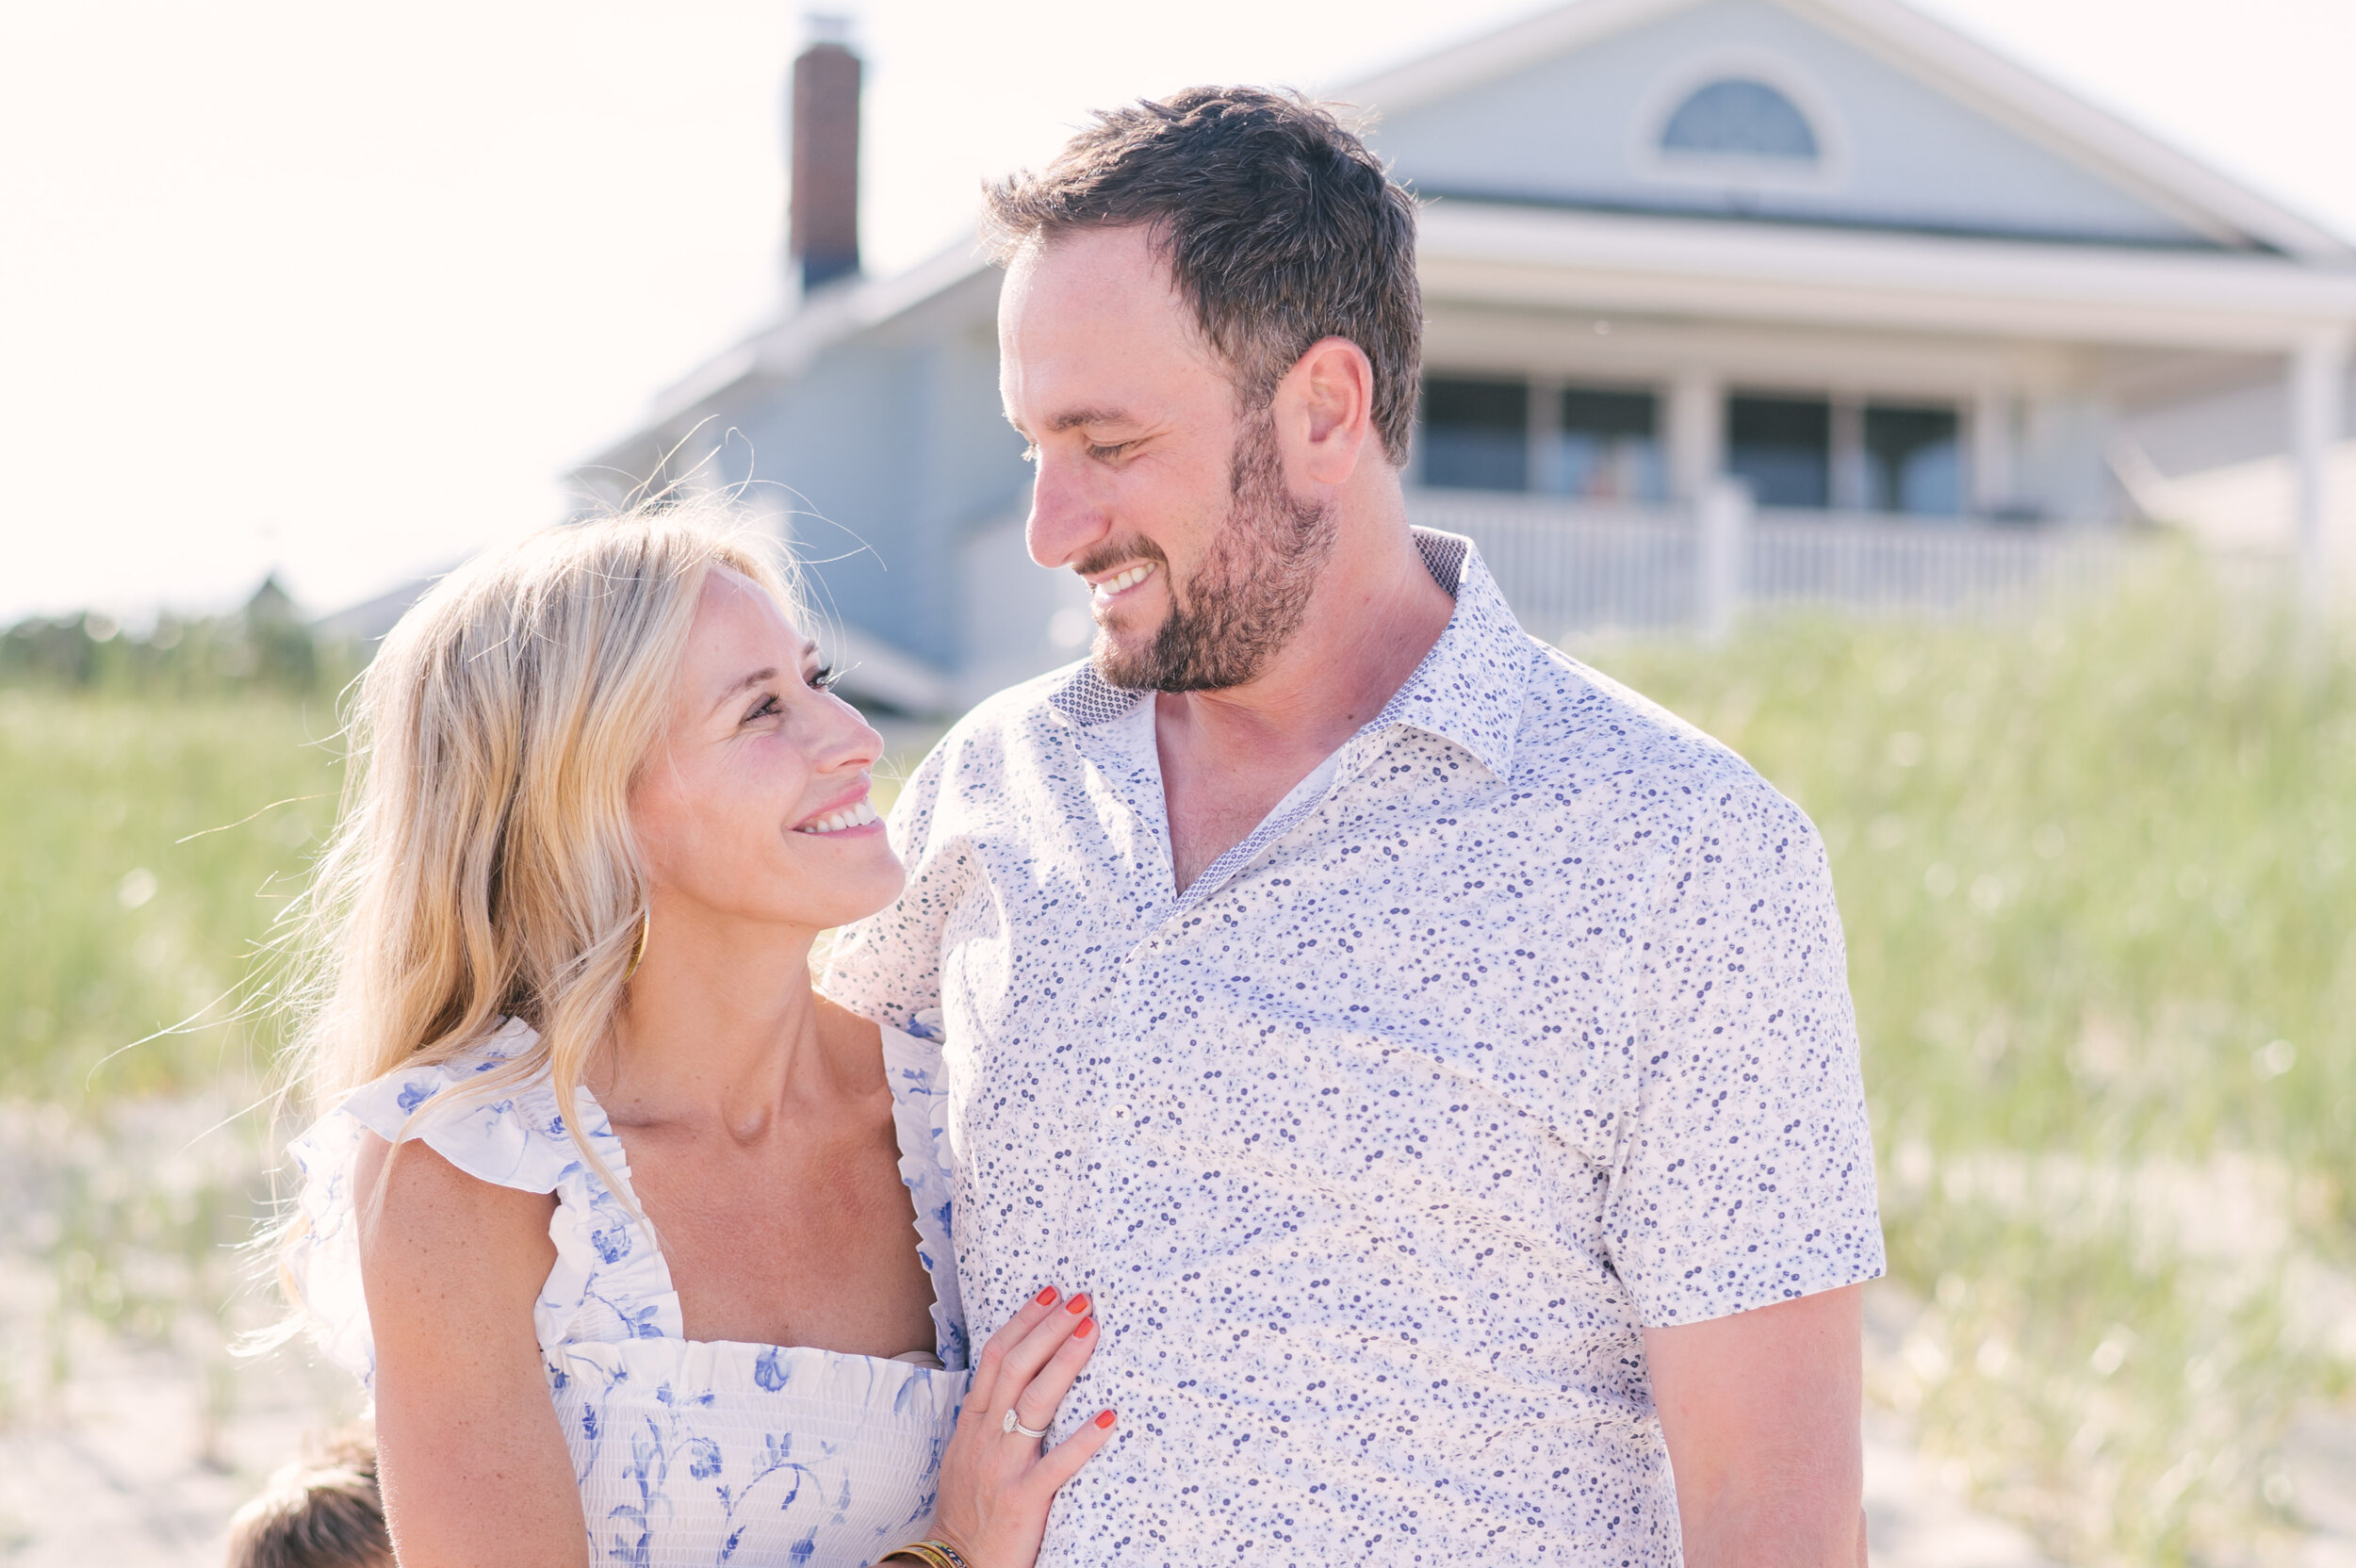 Husband and wife looking at each other during beach photos | NKB Photo